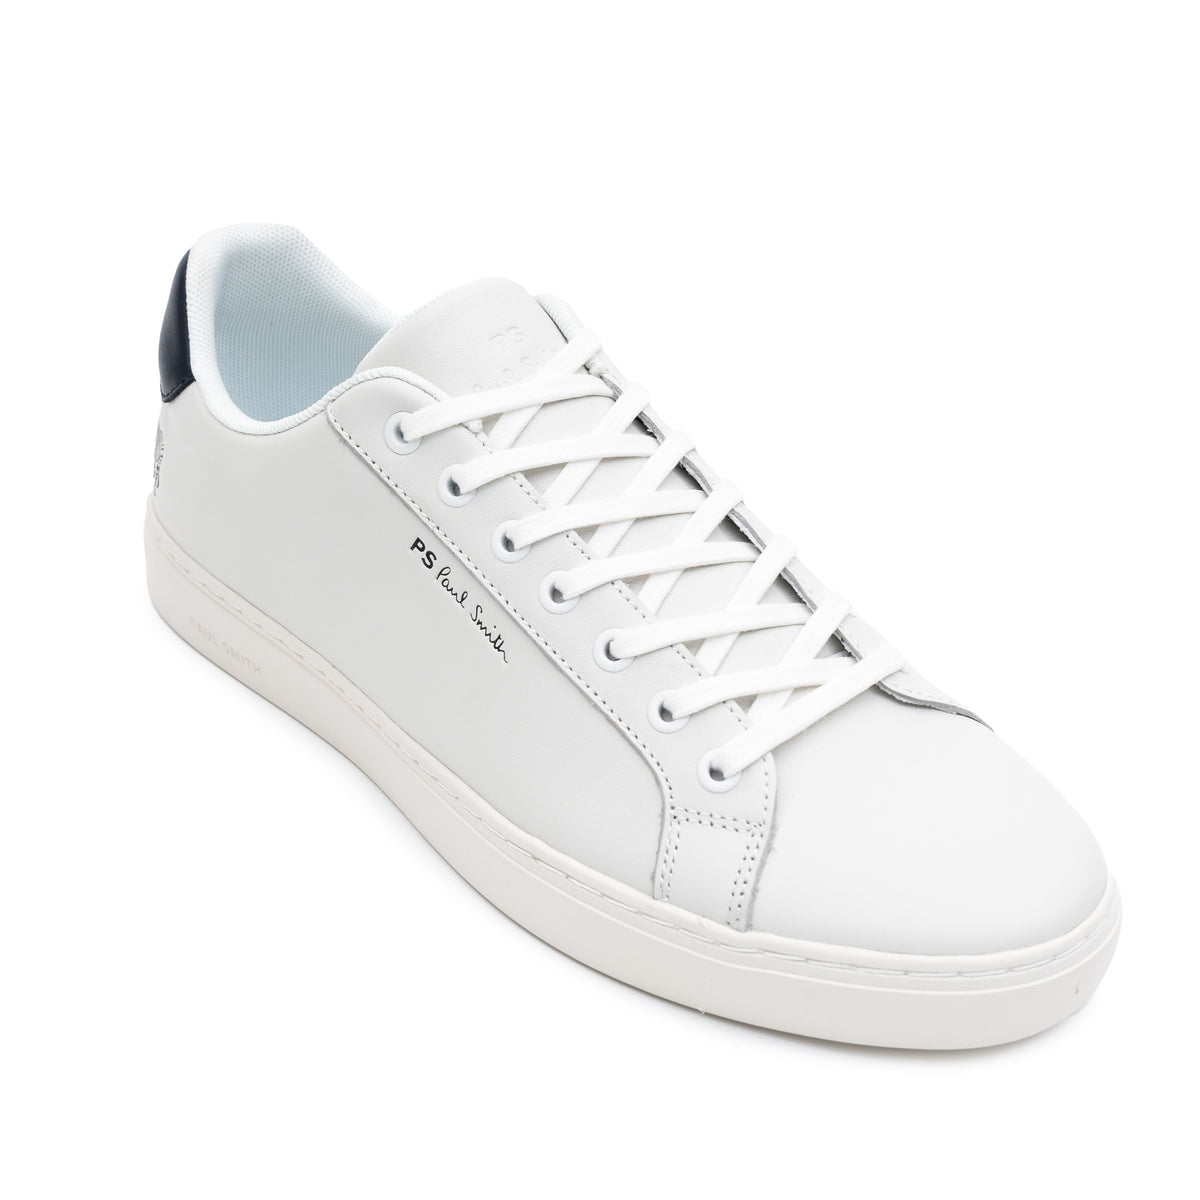 Load image into Gallery viewer, Paul Smith White Navy Tab Rex Shoe
